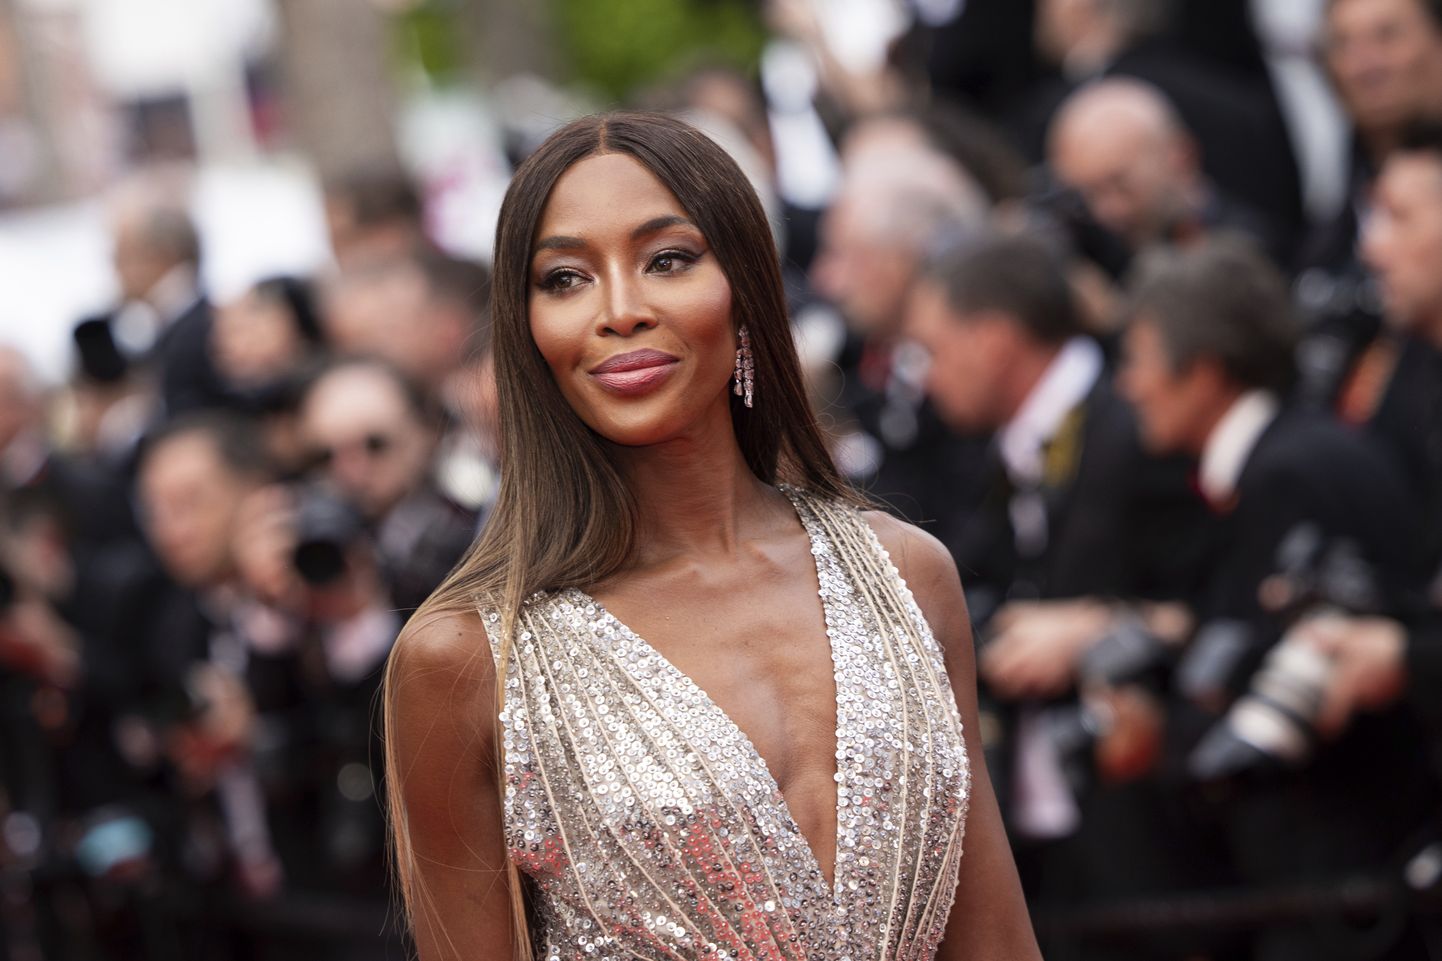 FILE - Naomi Campbell appears at the opening ceremony and the premiere of the film "Jeanne du Barry" at the 76th international film festival, Cannes, southern France, on May 16, 2023. Campbell has welcomed baby No. 2. The British supermodel wrote Thursday on Instagram that her son is a true gift from God. In May 2021, she introduced her firstborn on the cover of British Vogue. (Photo by Vianney Le Caer/Invision/AP, File)  NYET403